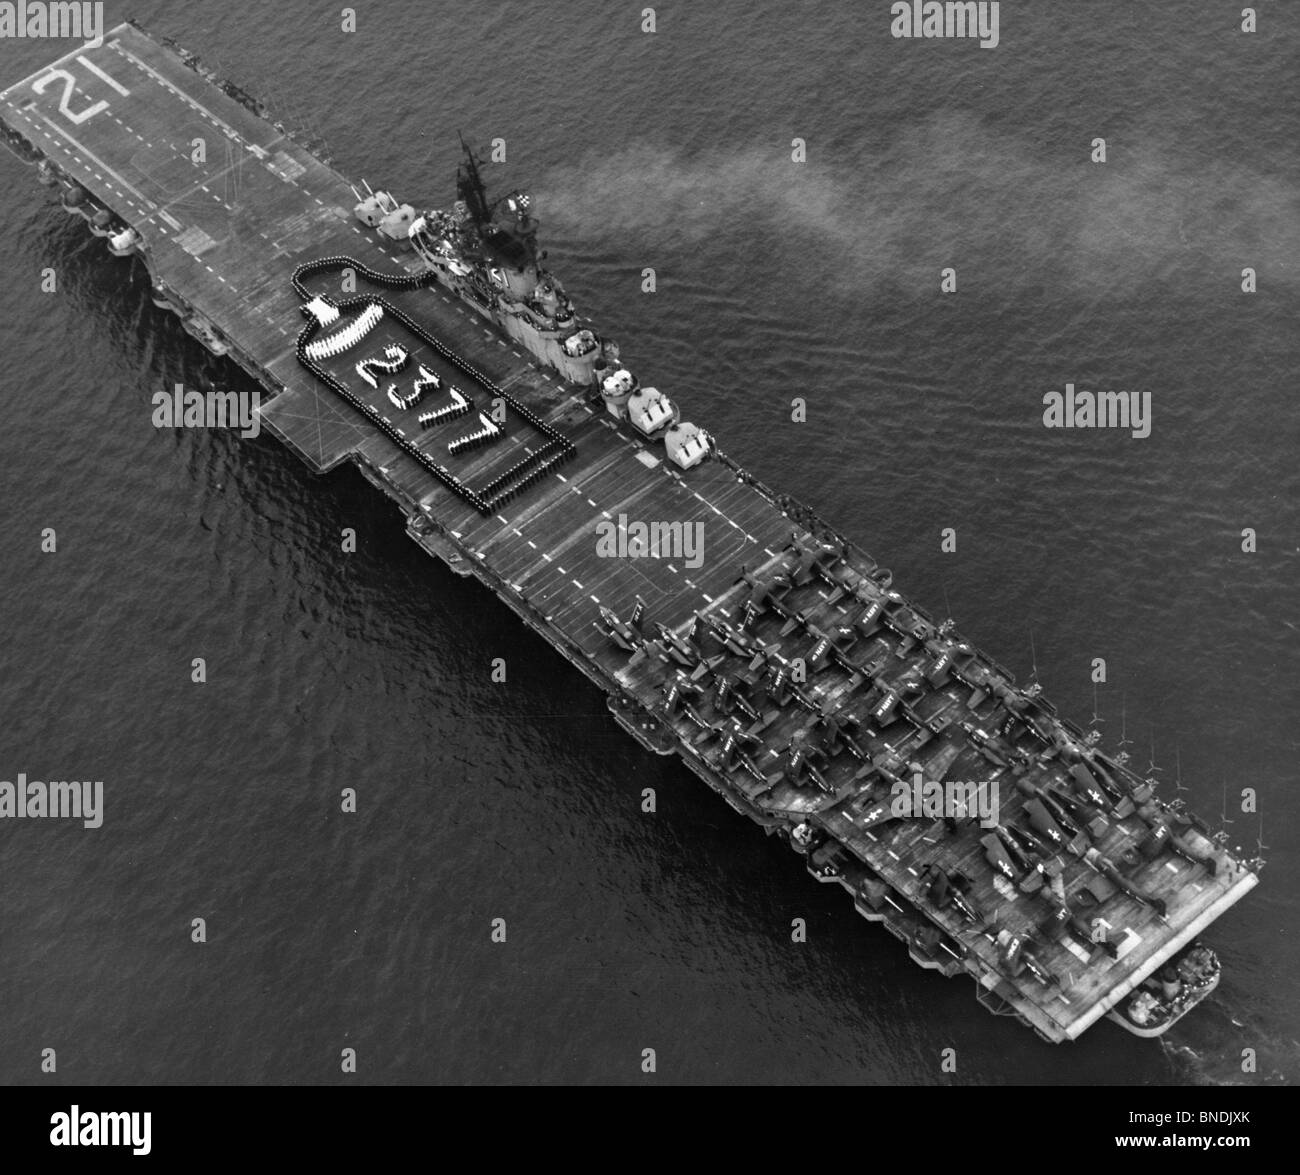 High angle view of an aircraft carrier in the sea, USS Boxer (CV-21), 1951 Stock Photo